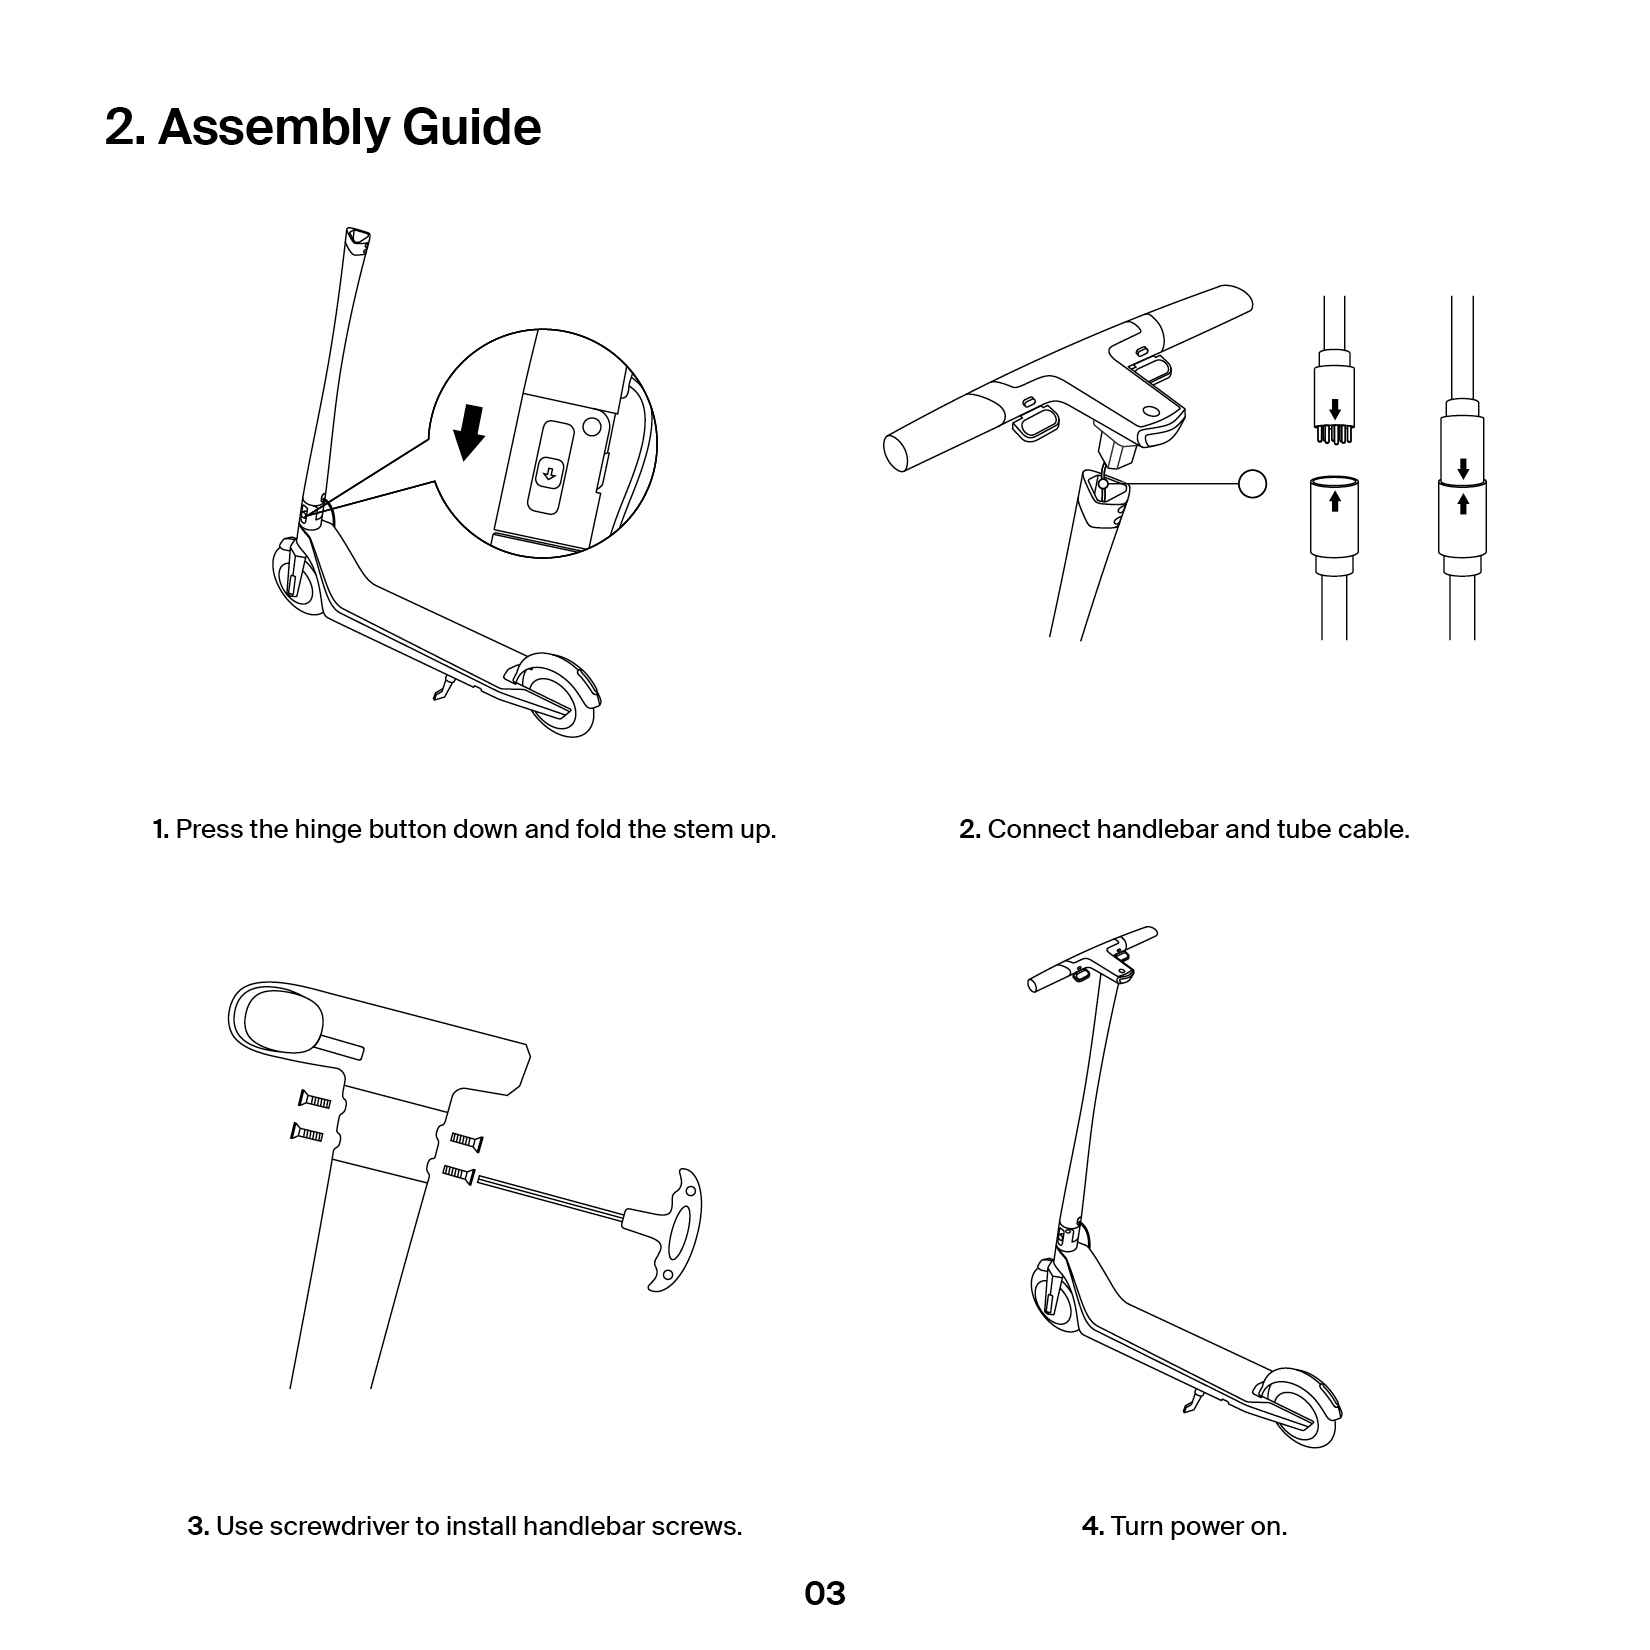 Assembly Guide